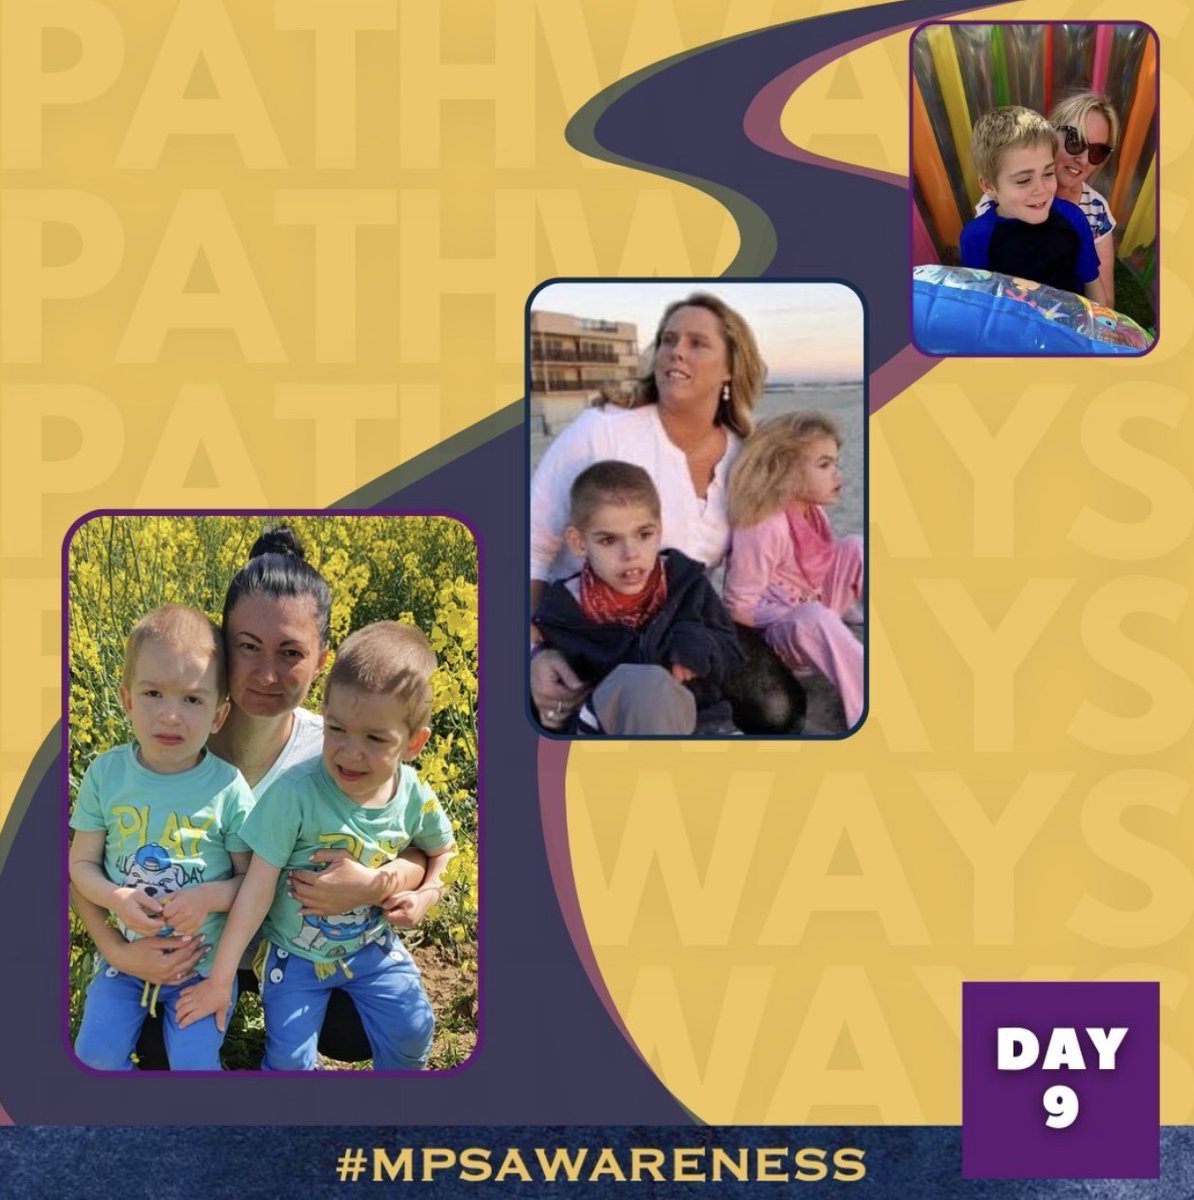 #MPSAwareness: Day 9 Are you a newly diagnosed family searching for resources, help and answers? Please contact us! Our Pathways program assists families in supporting you every step of the way throughout the first year of your journey with MPS/ML. mpssociety.org/support/newly-…